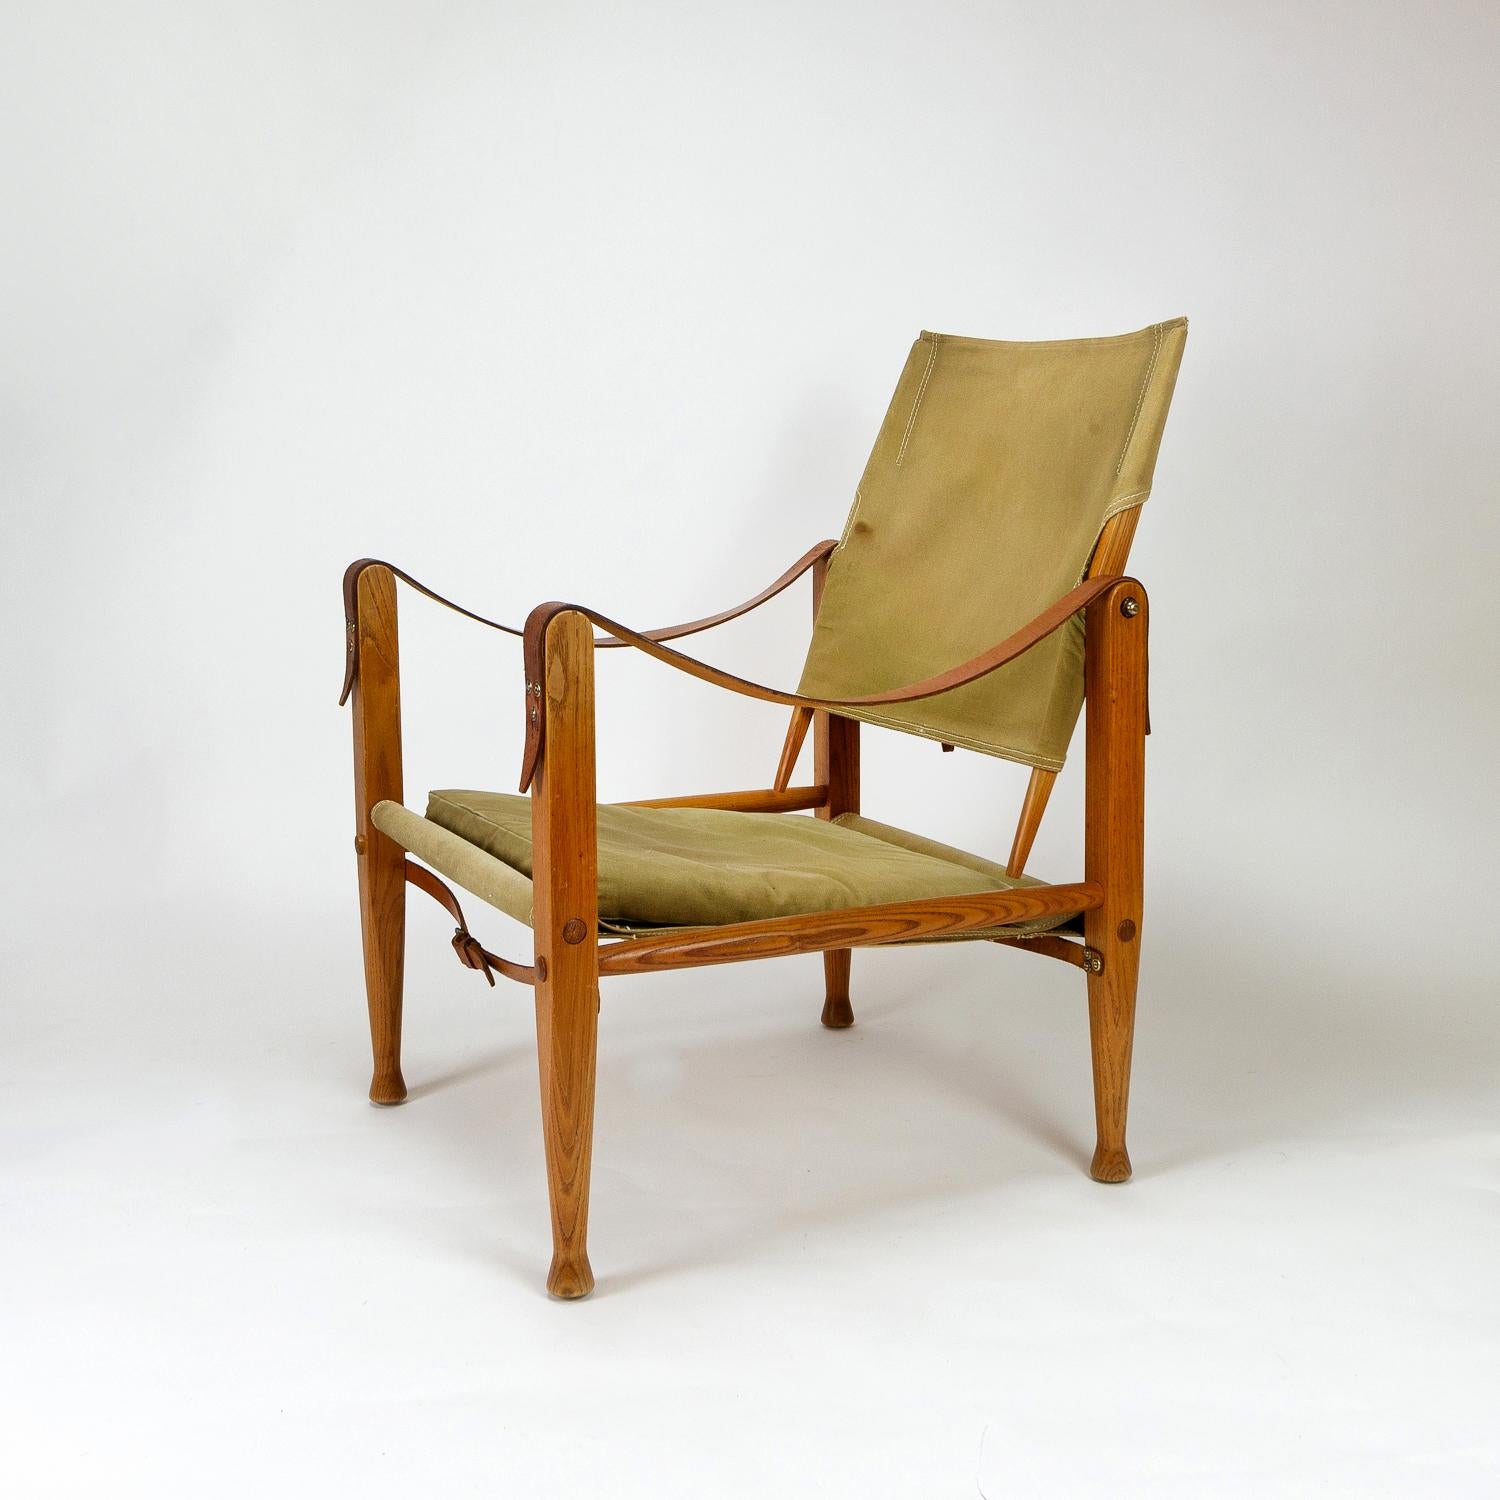 Safari chair in ash with original khaki canvas seat, cushion and back designed by Kaare Klint, the father of Danish functionalism. In great original condition. Stitching all good and lovely patina on the frame. Designed in 1933 and made by Rud